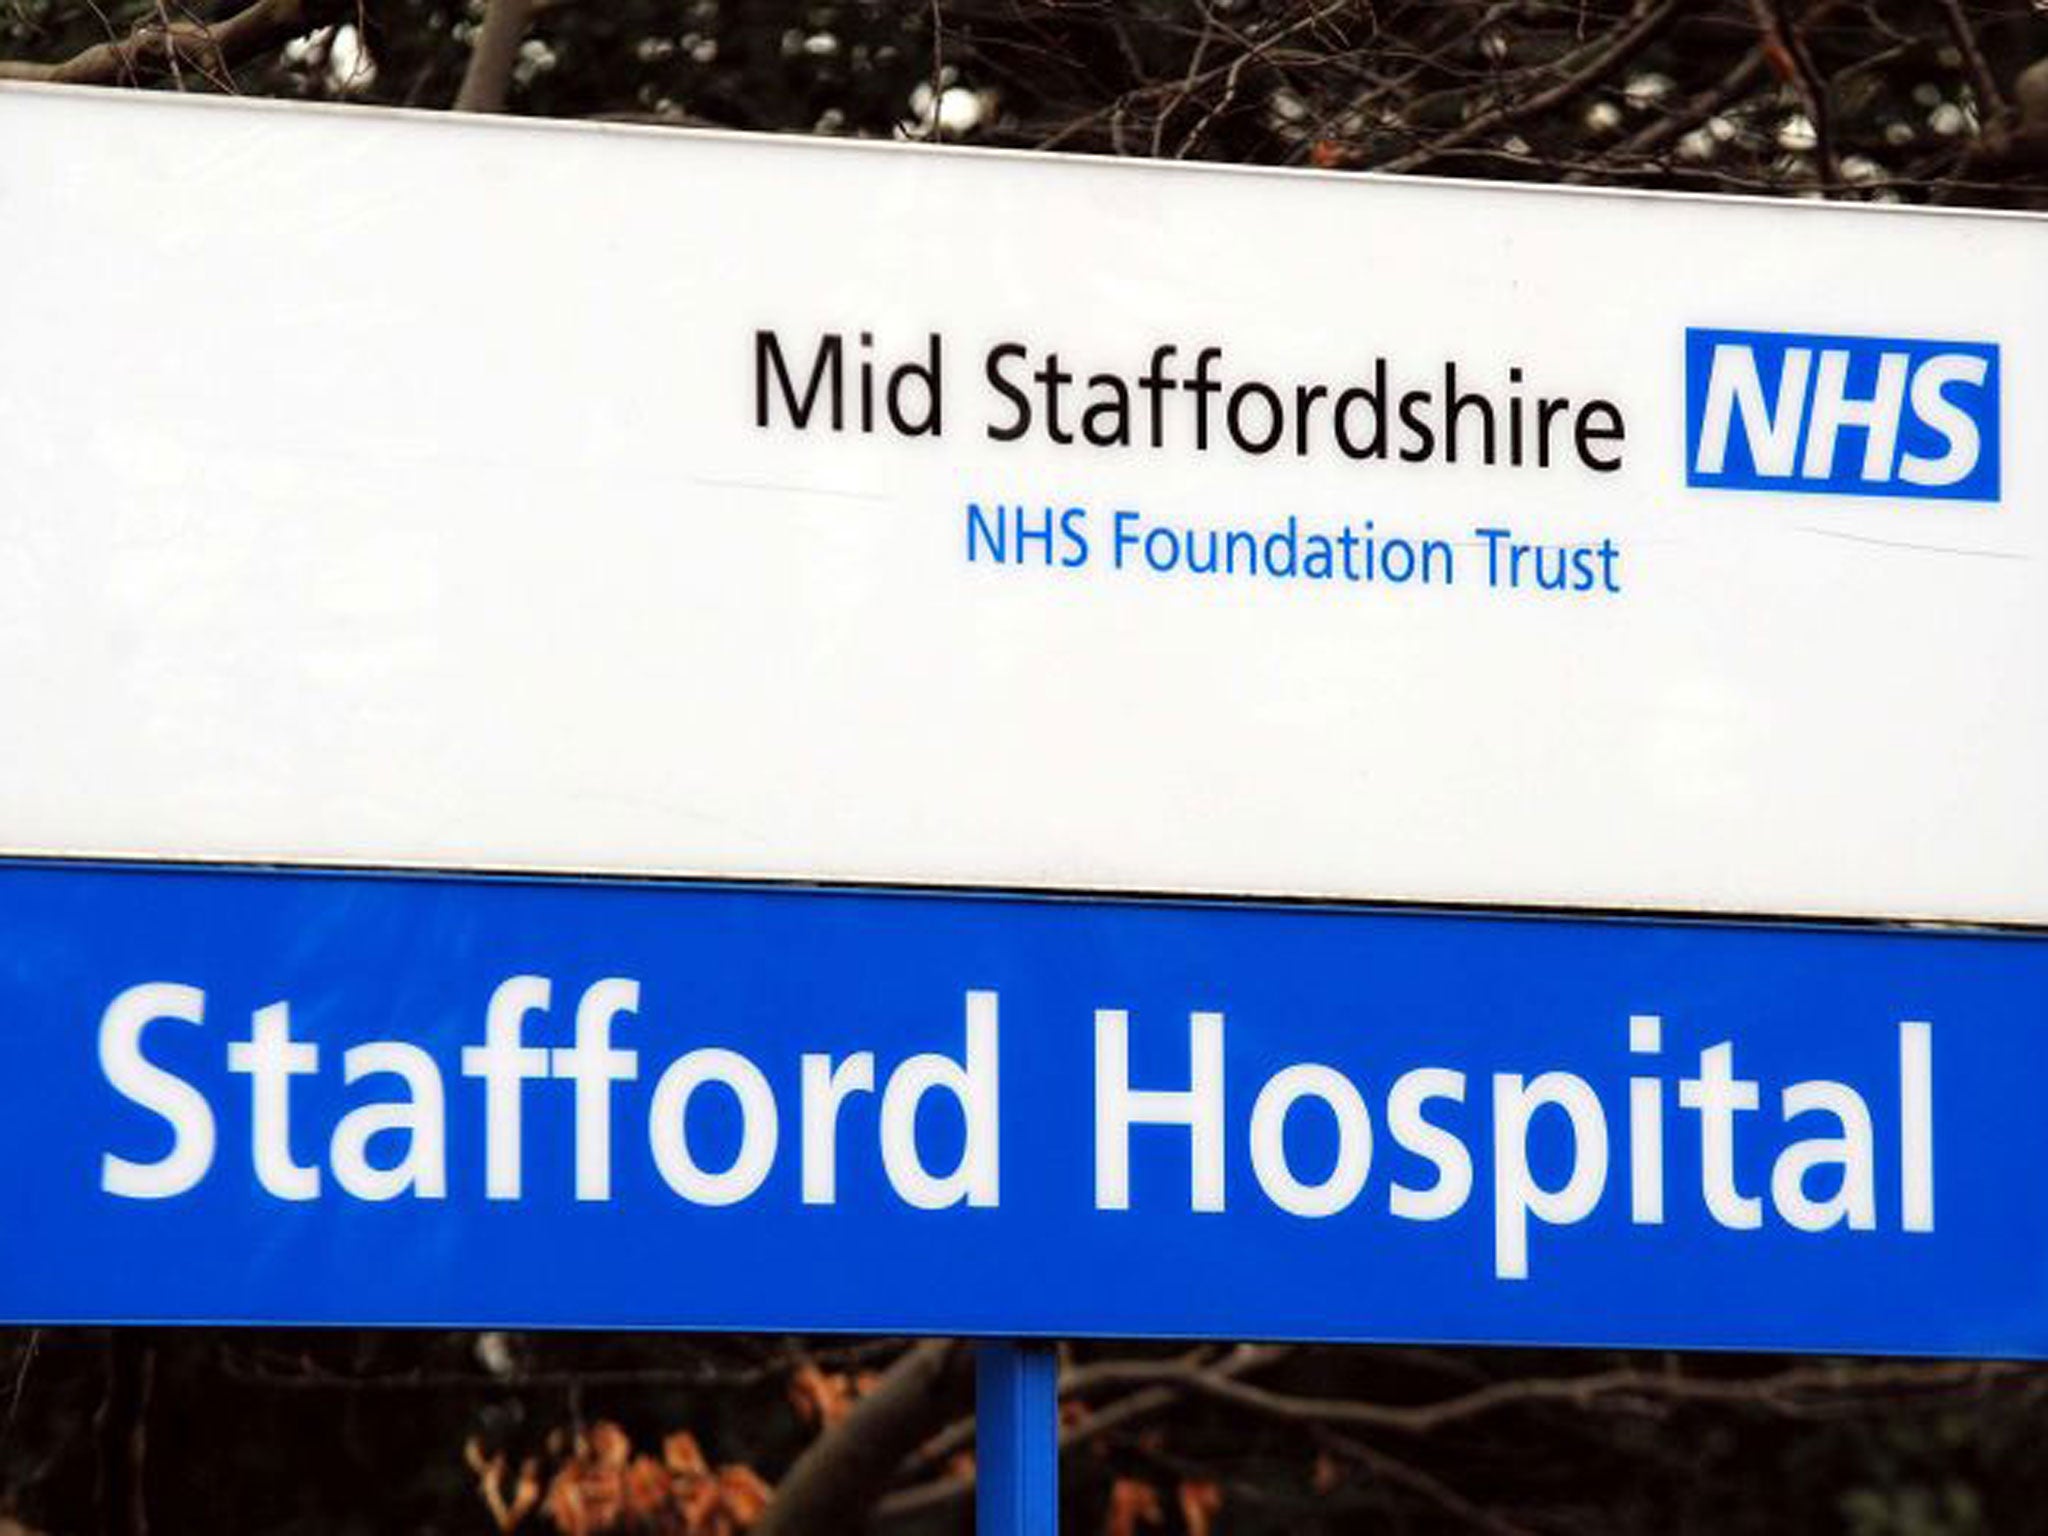 The Mid Staffordshire NHS Trust went into administration in April